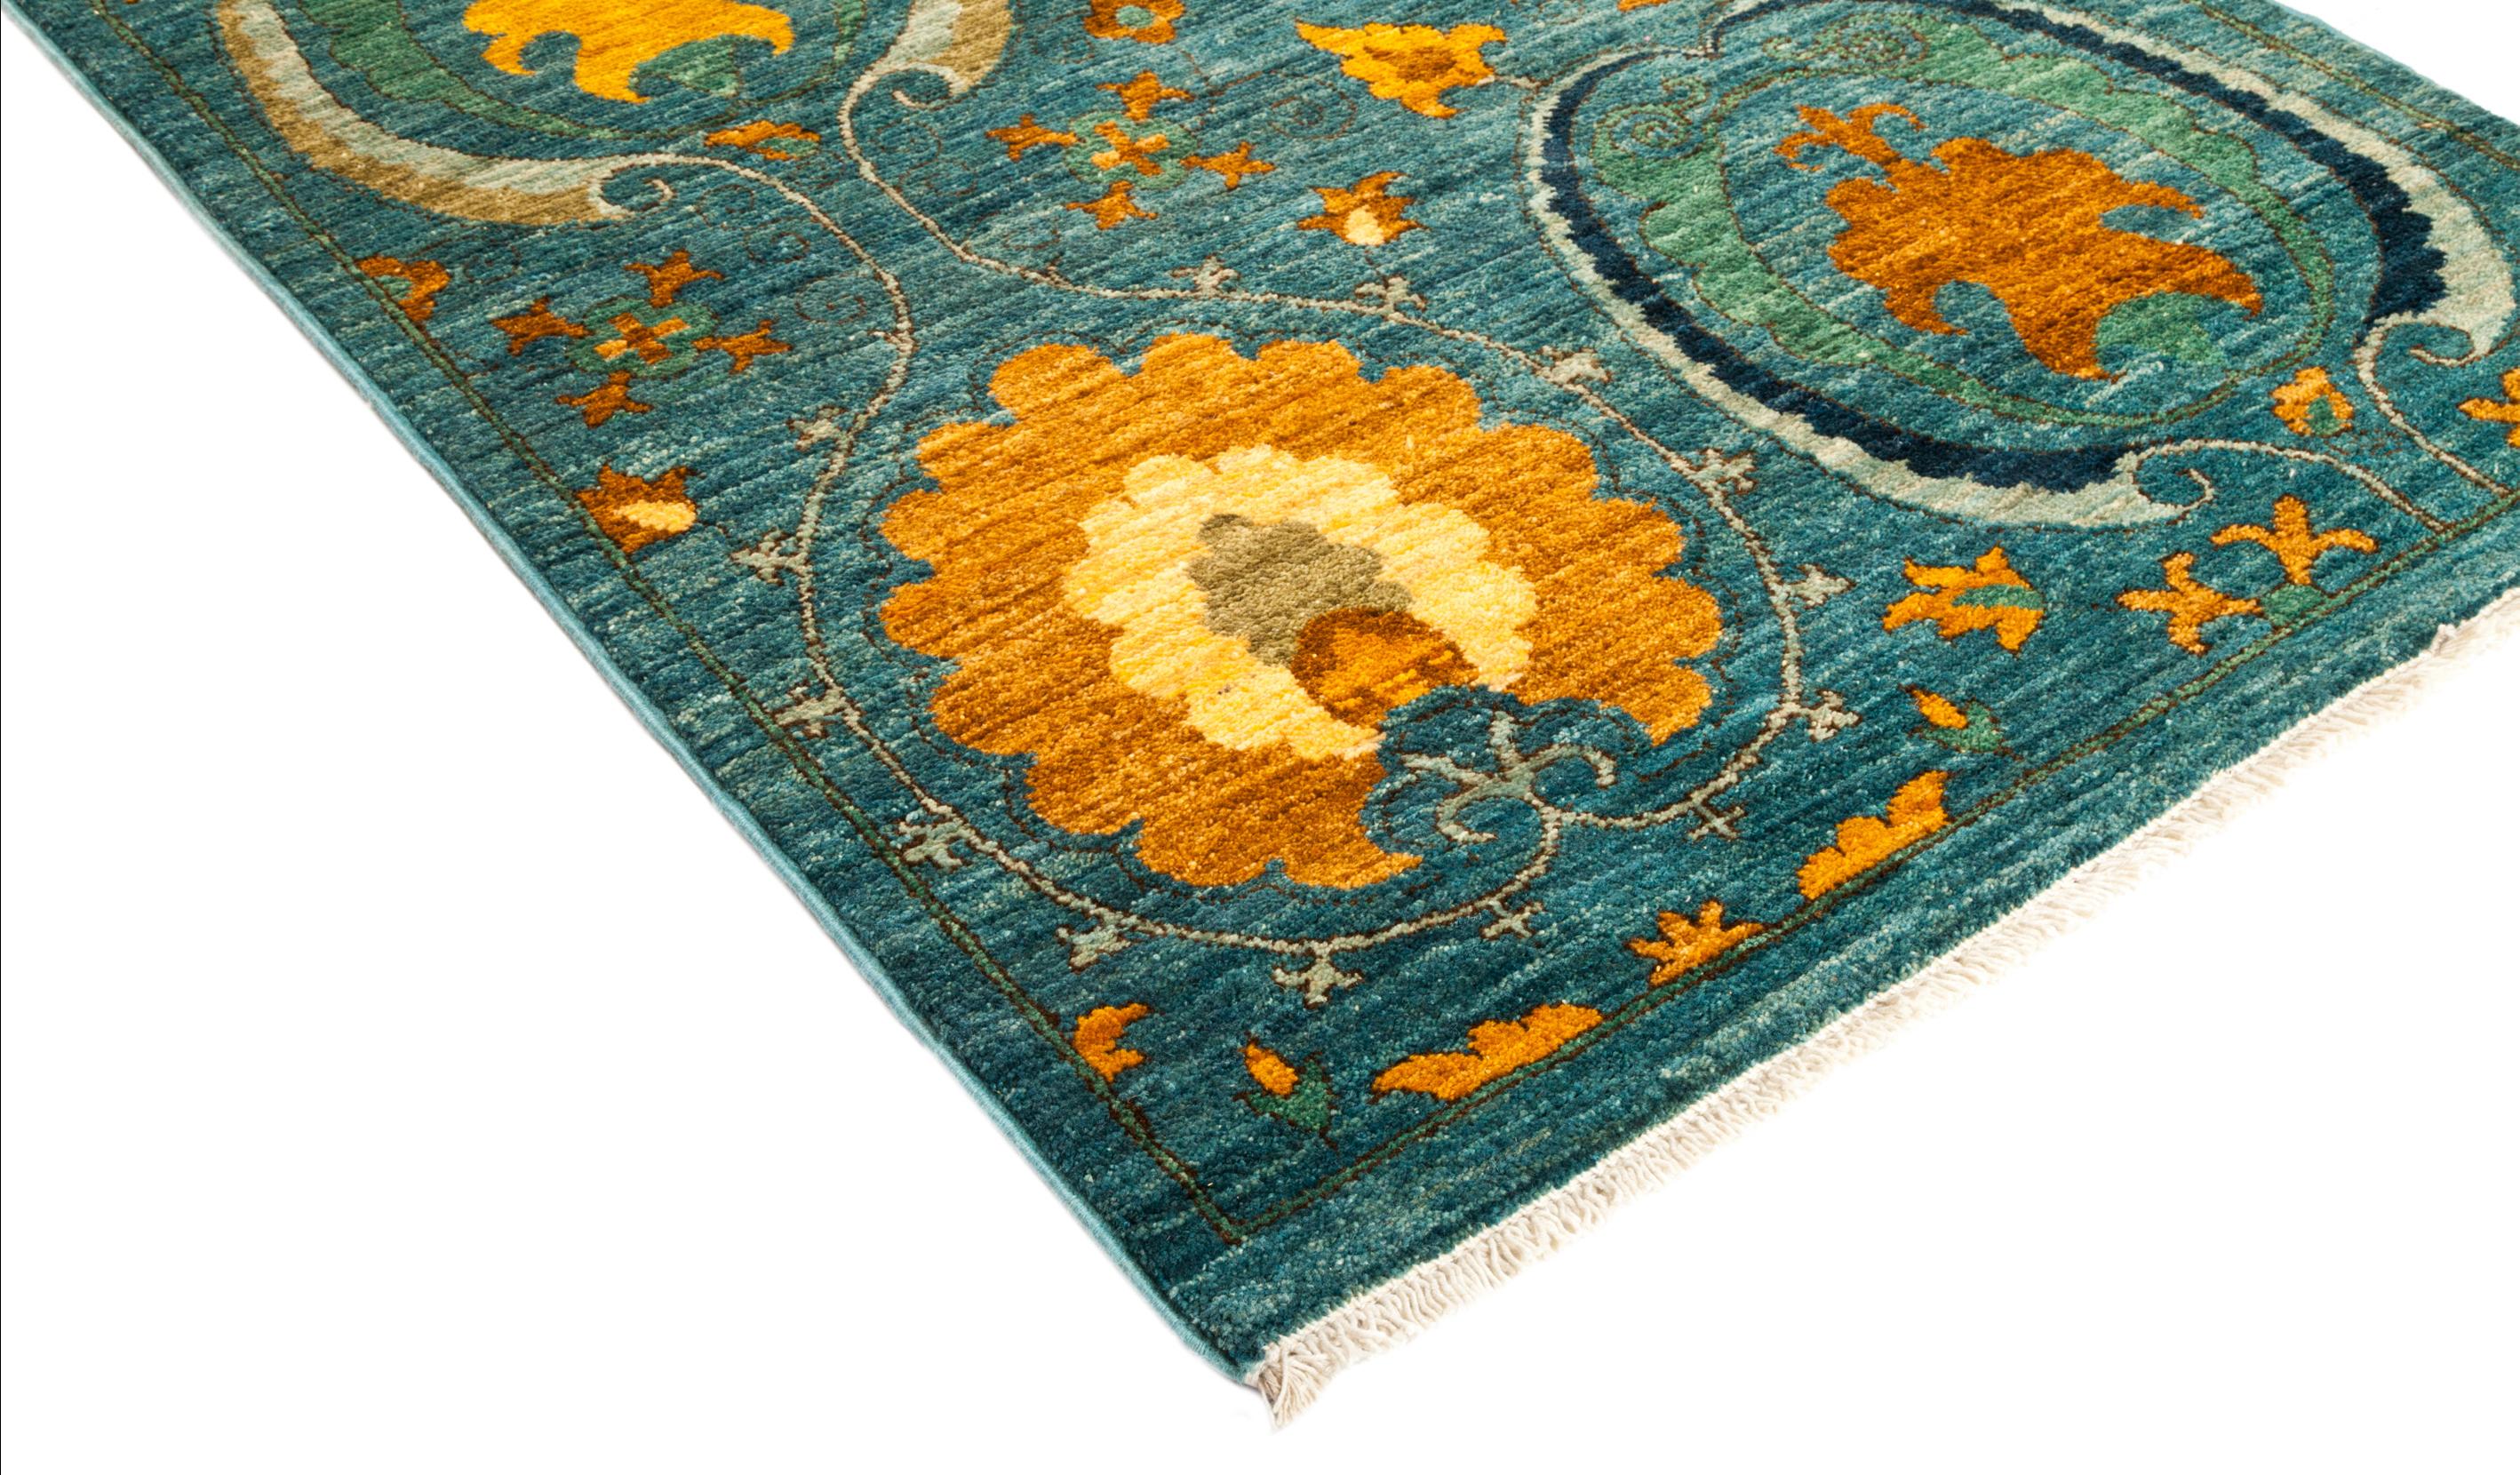 Color: Blue - Made in: Pakistan. 100% wool. Whether boasting a field of flowers or ancient tribal symbols, patterned rugs are the easiest way to enrich a space. Subtle colors and intricate motifs reinforce the quiet sophistication of a traditional